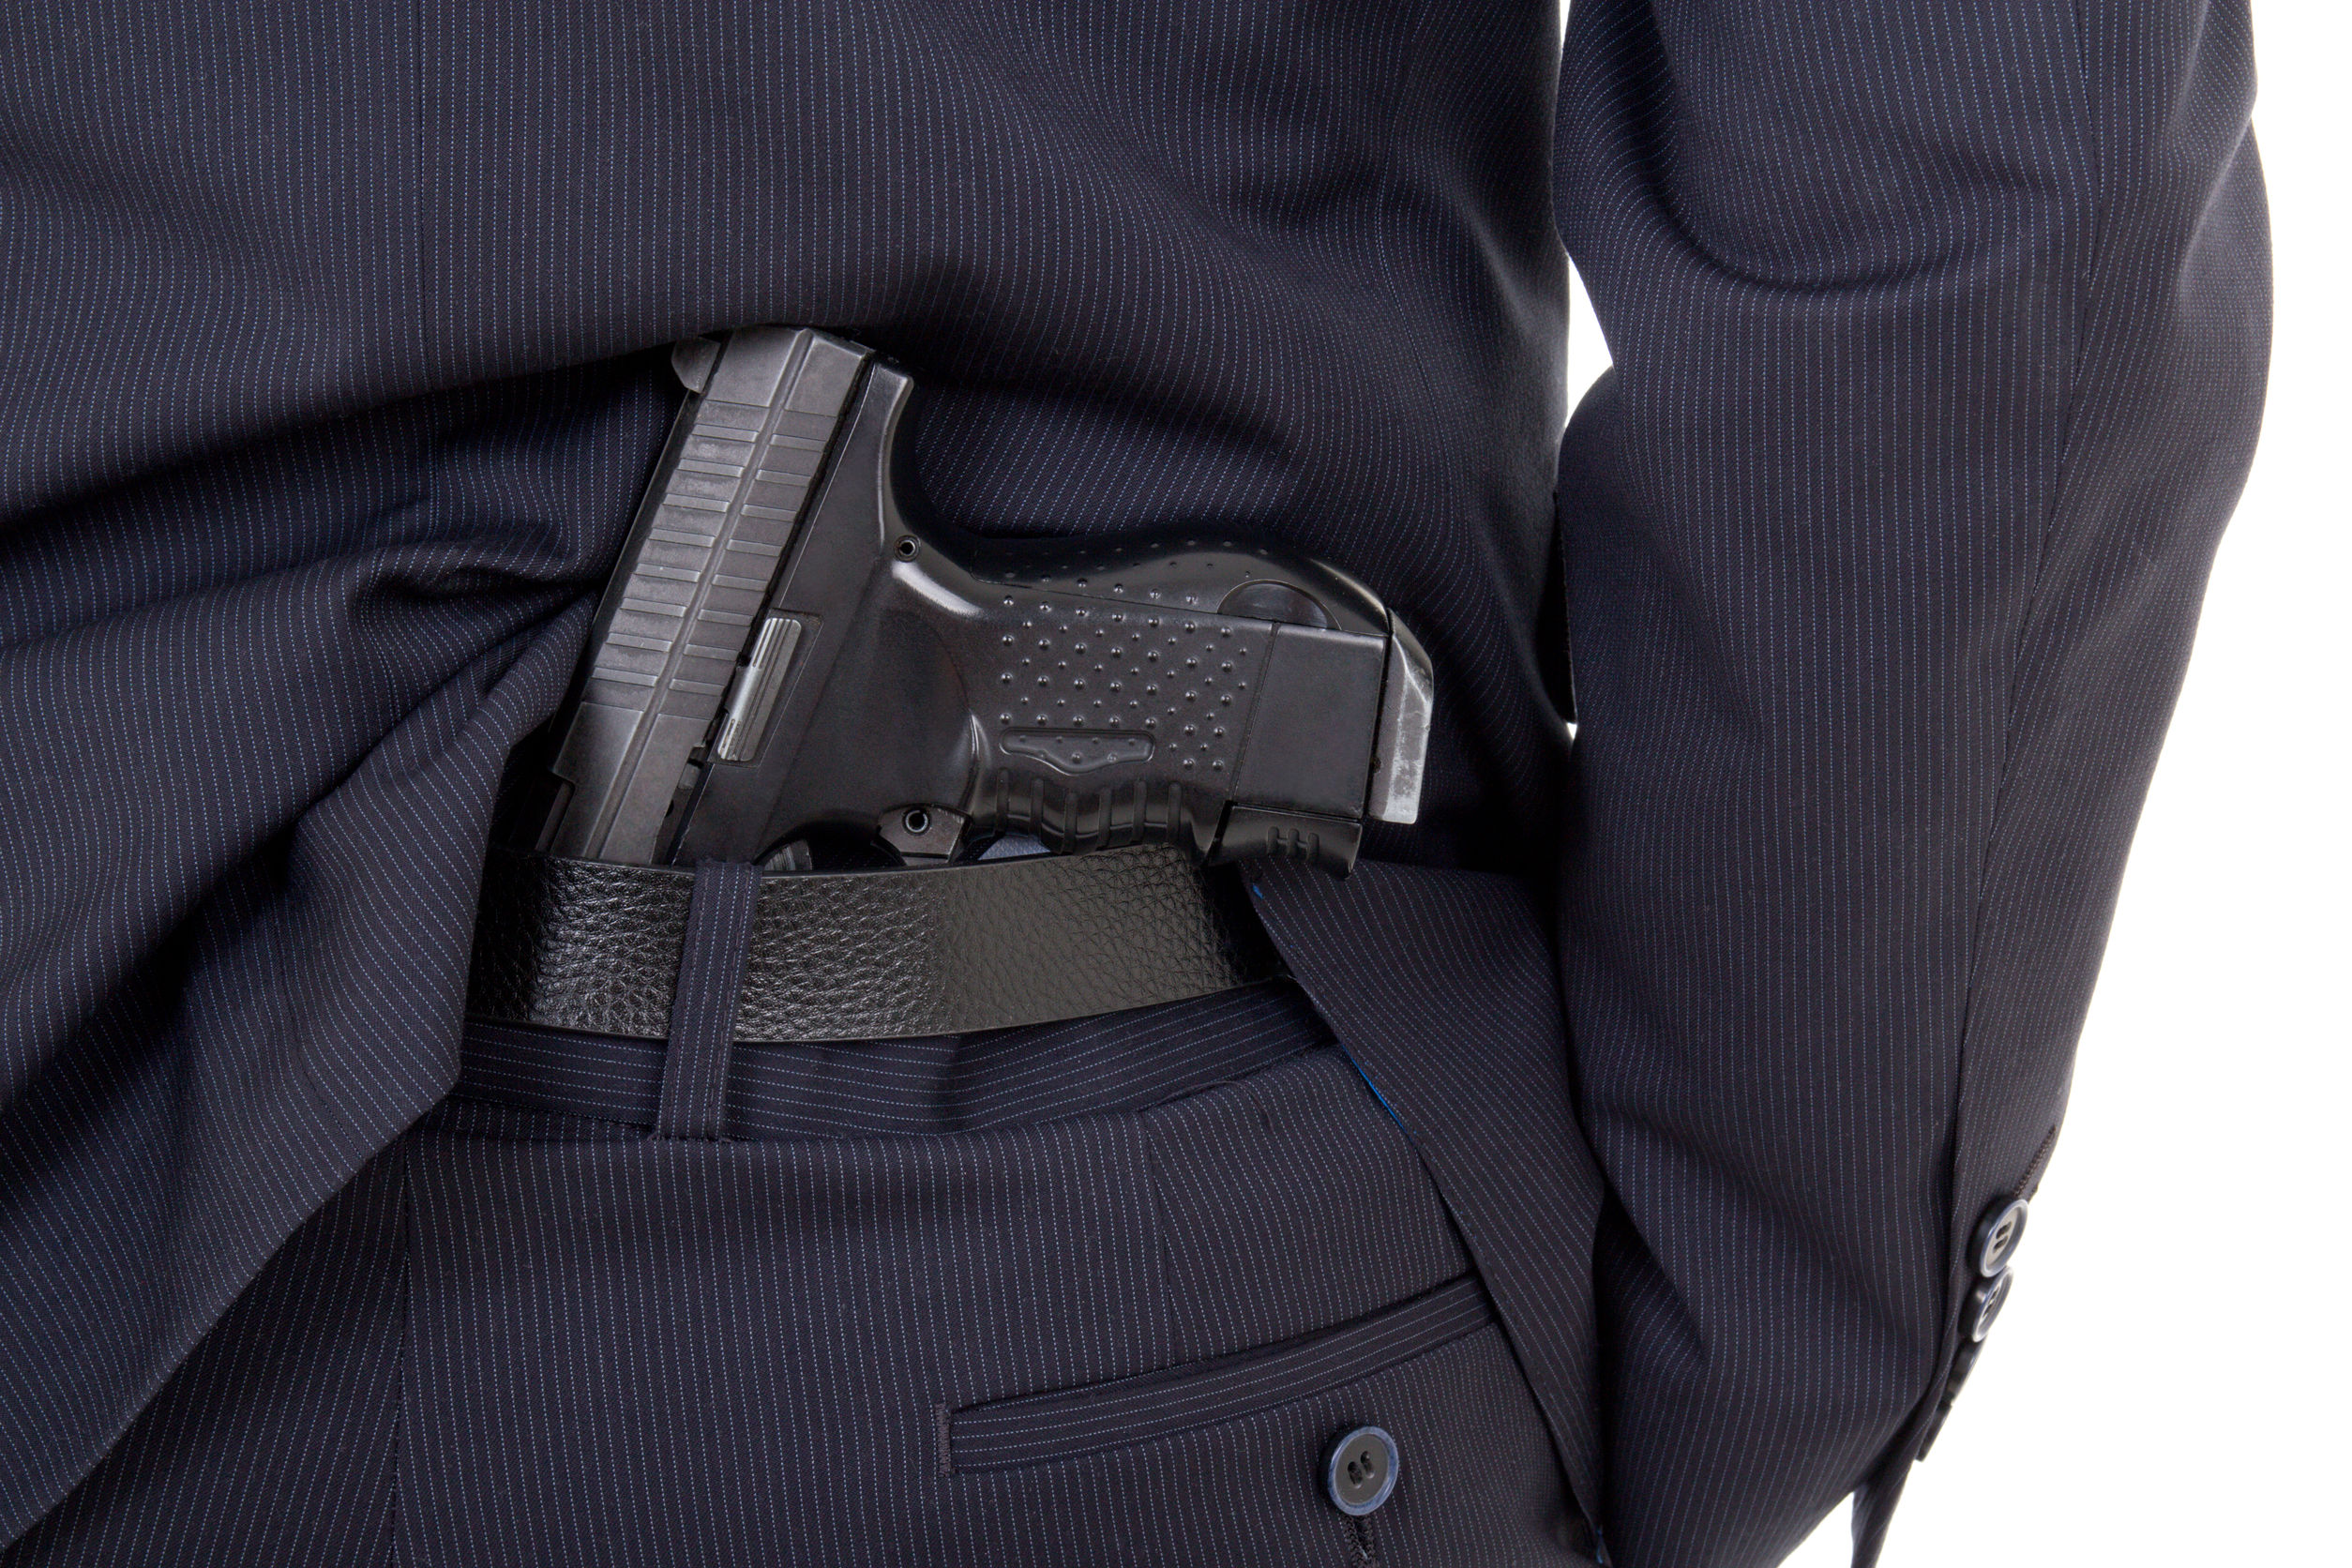 Why get a Virginia Nonresident Concealed Handgun Permit?